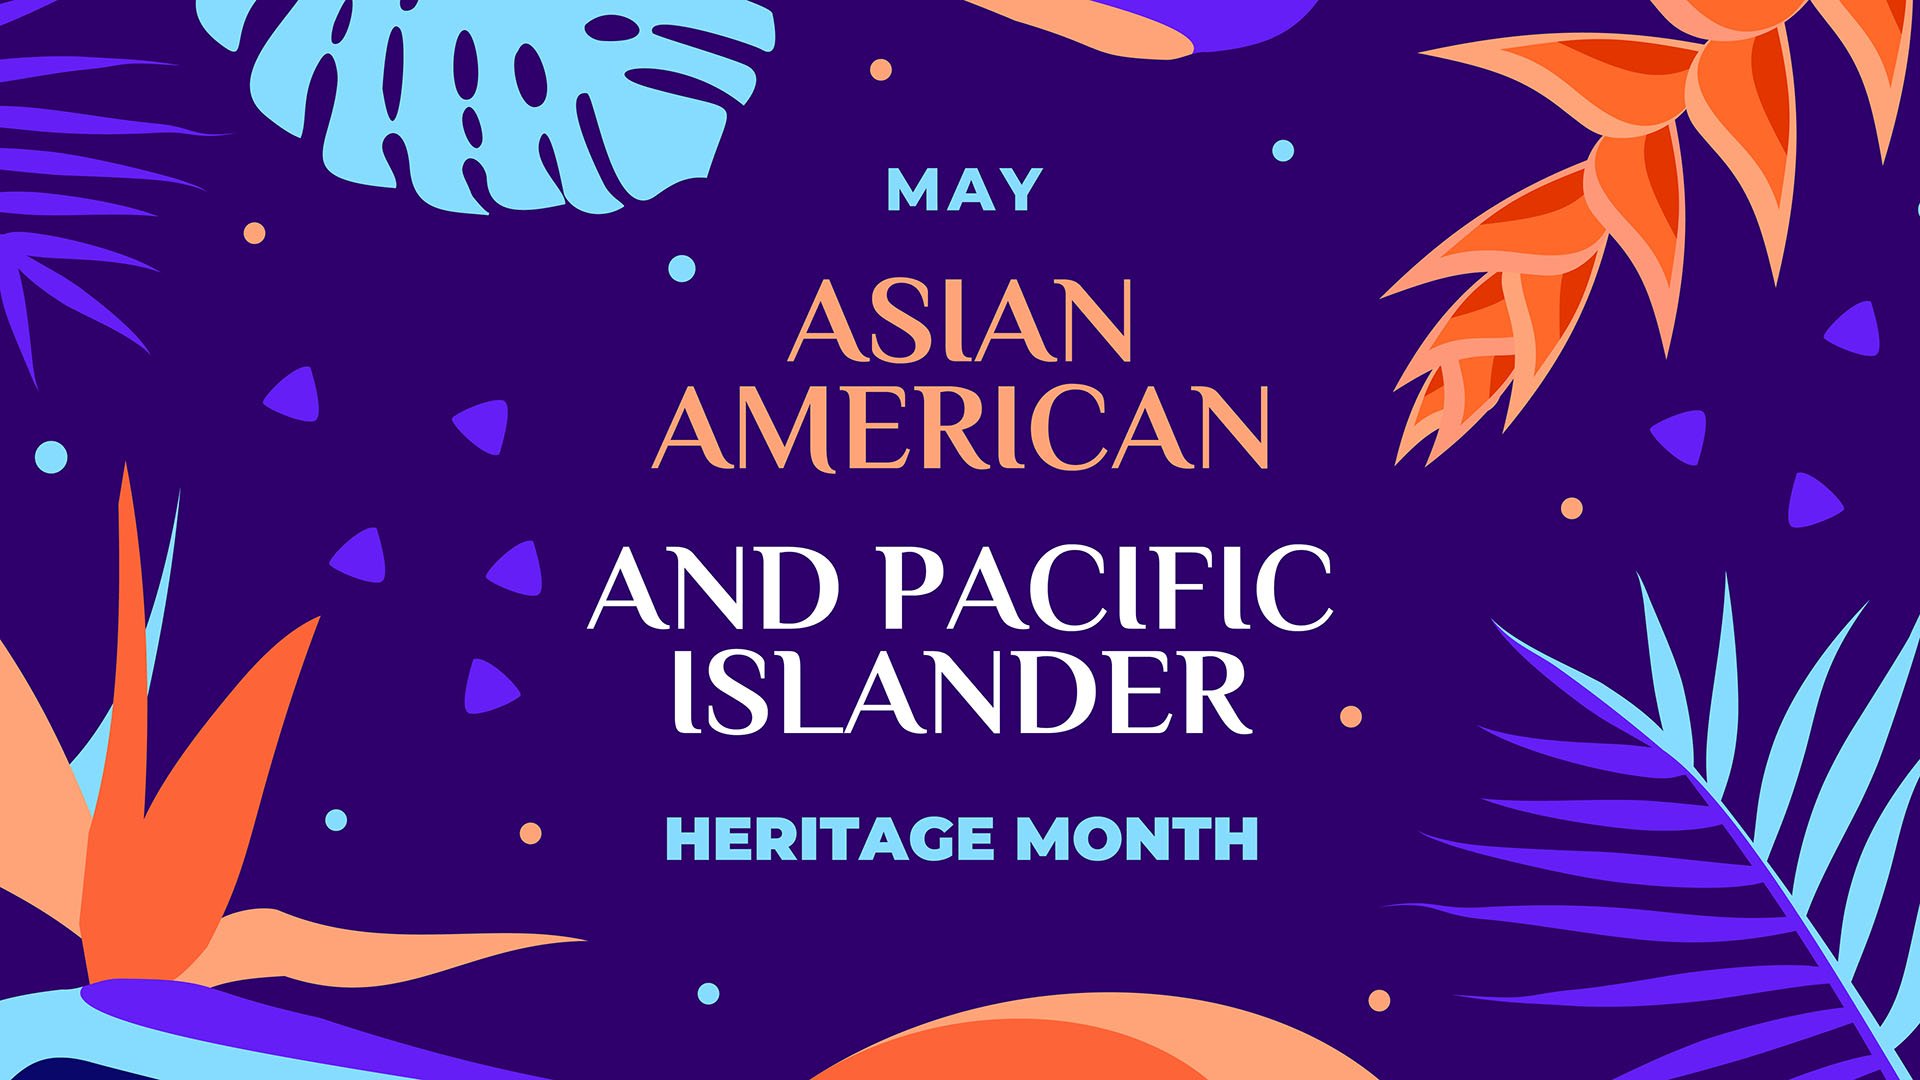 floral image that says Asian American and Pacific Islander heritage month